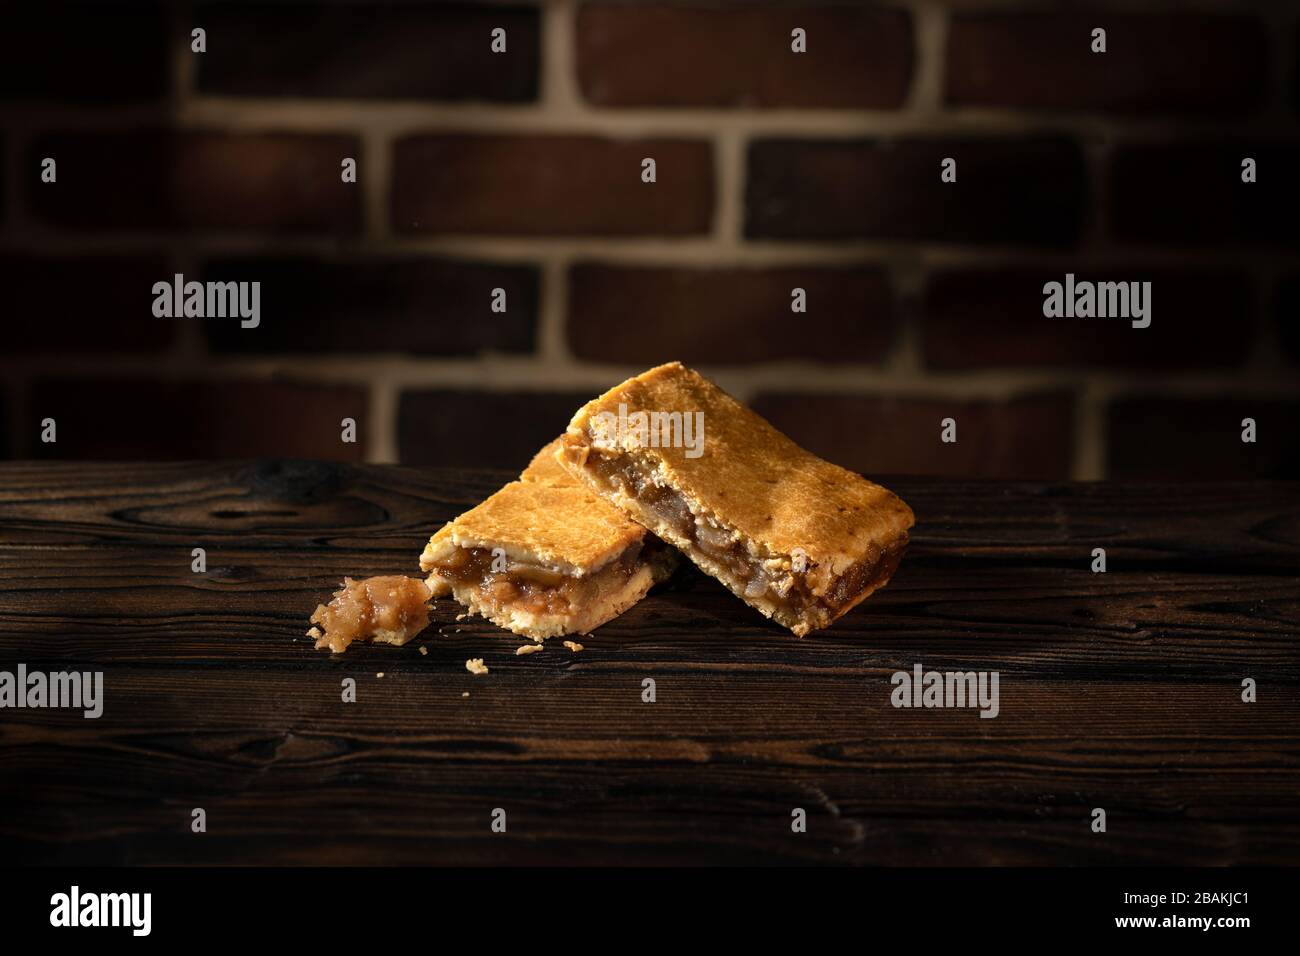 Two apple cake on wooden table and brick wall background Stock Photo